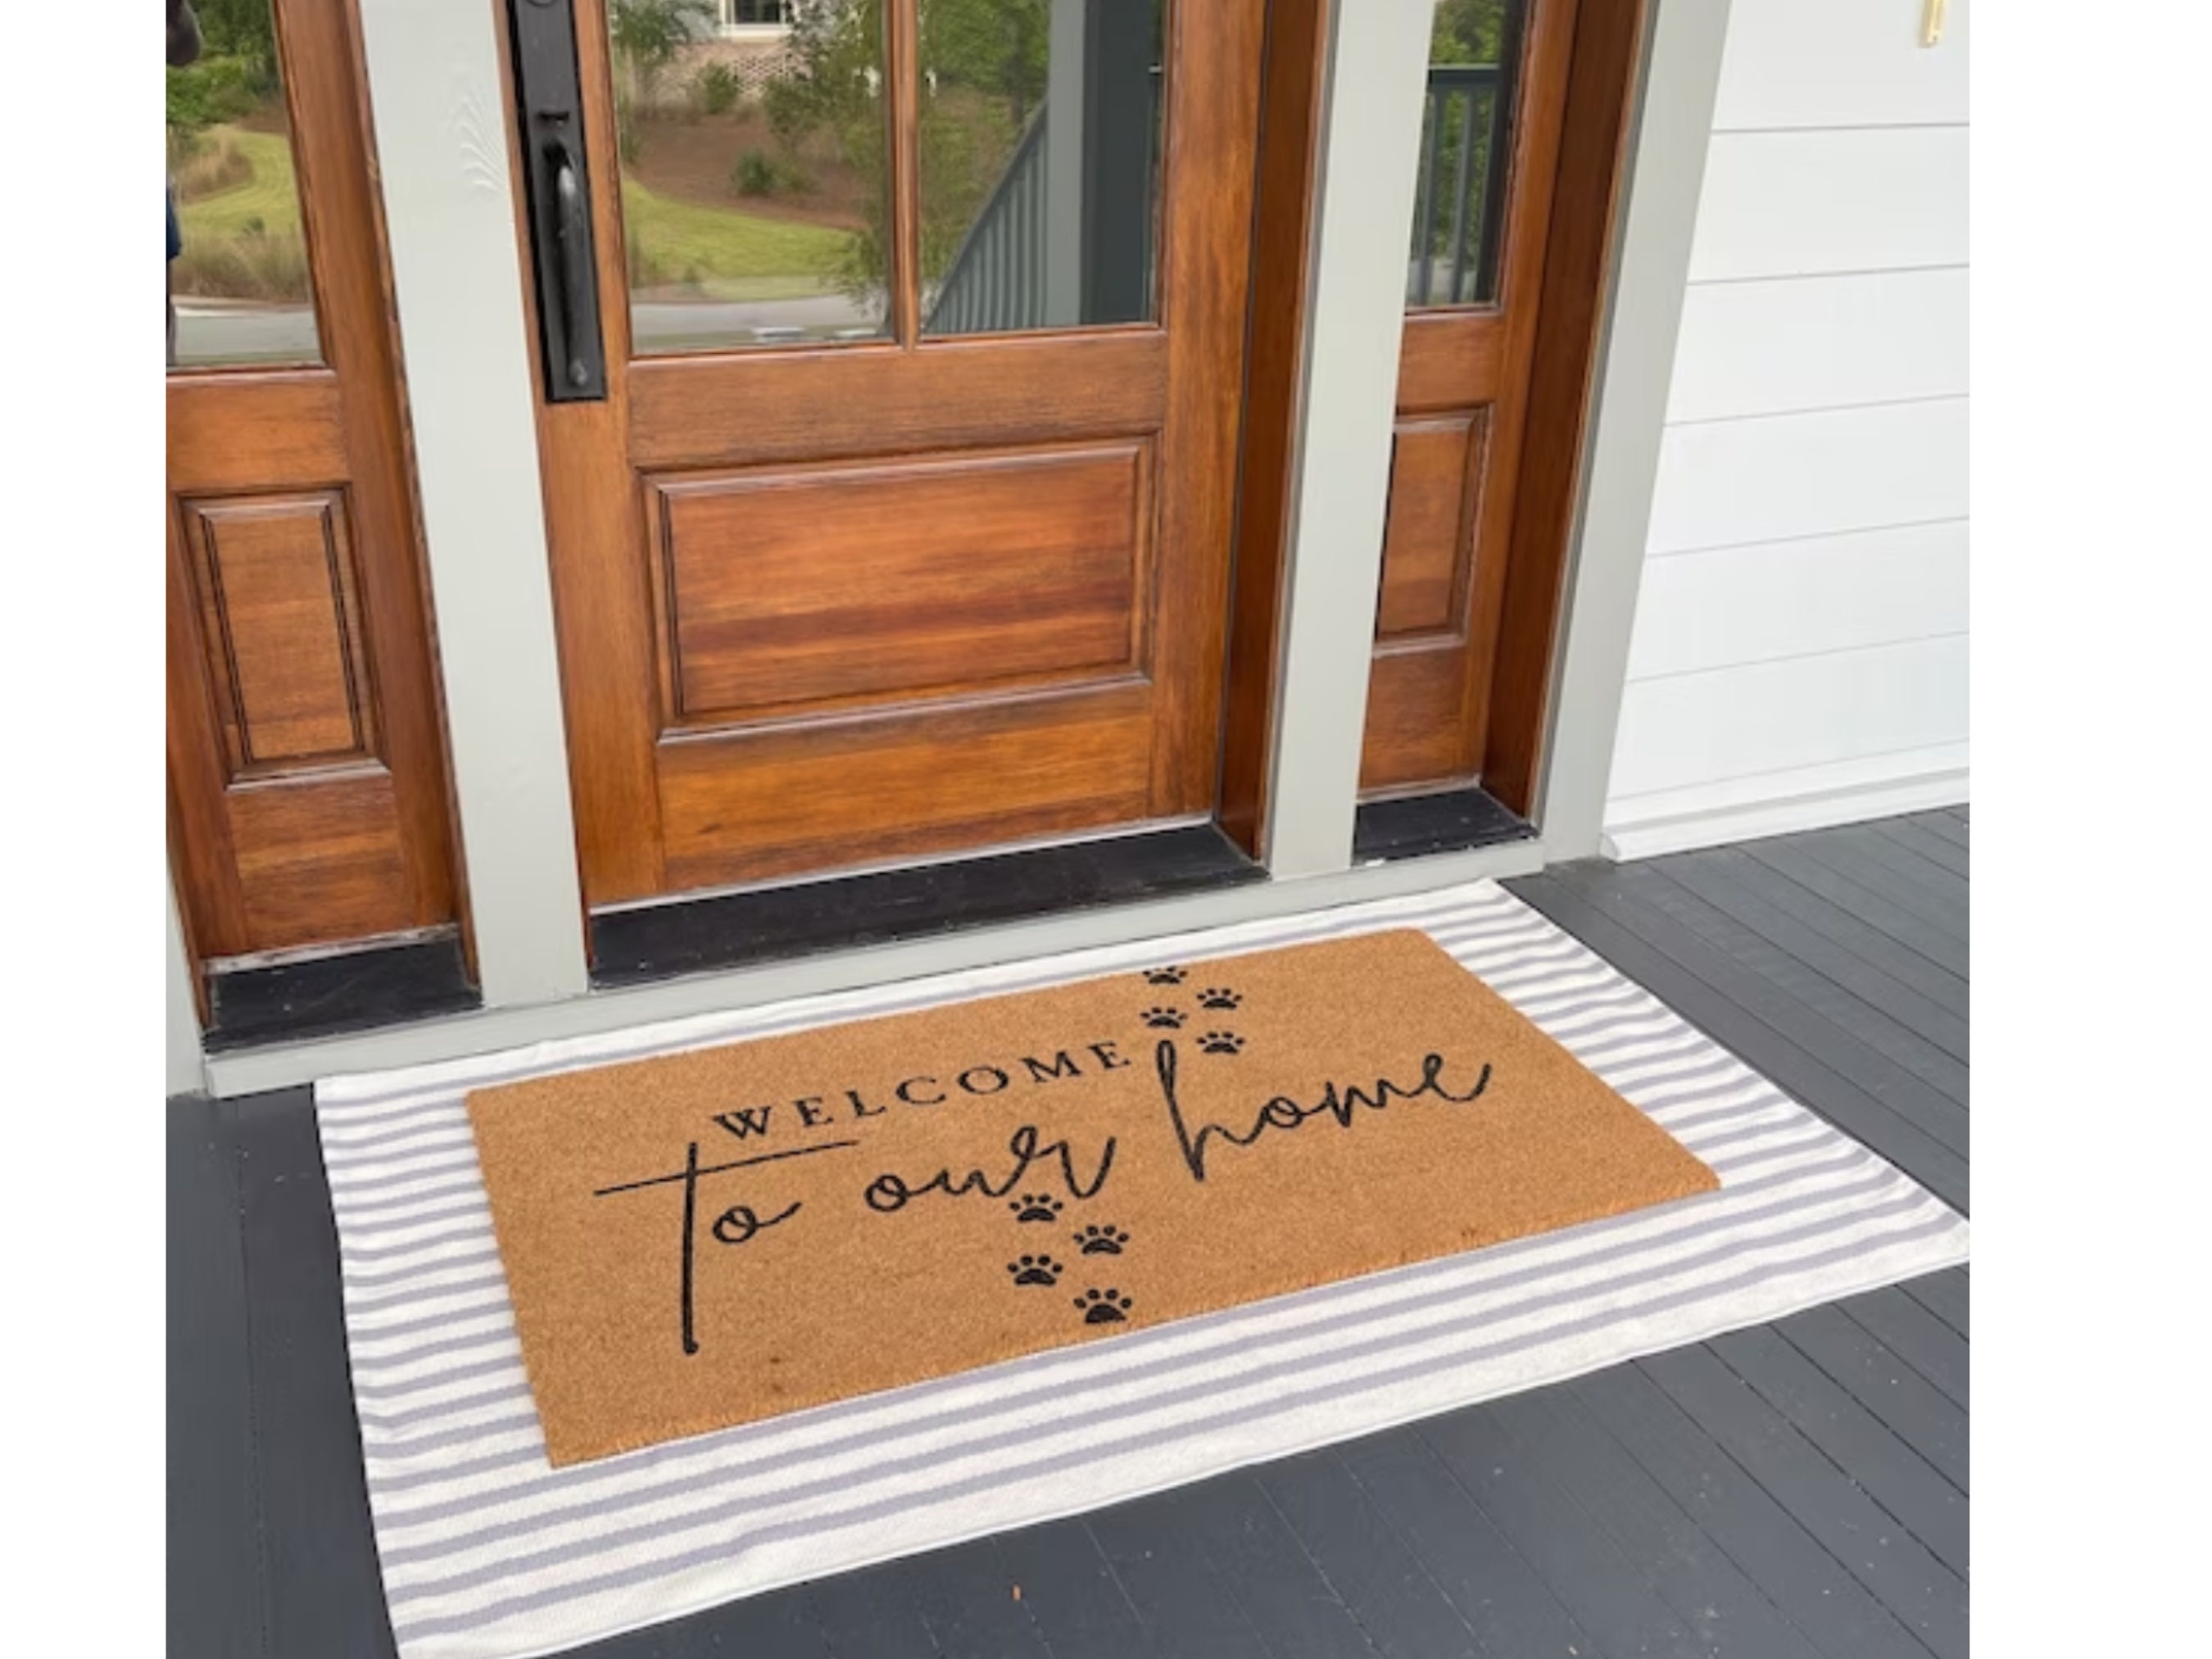 KOZYFLY Striped Outdoor Rug 3x5 Ft Front Door Rug Gray and White Hand Woven  Cotton Washable Outdoor Doormats Outdoor Entrance Mat for Front Door